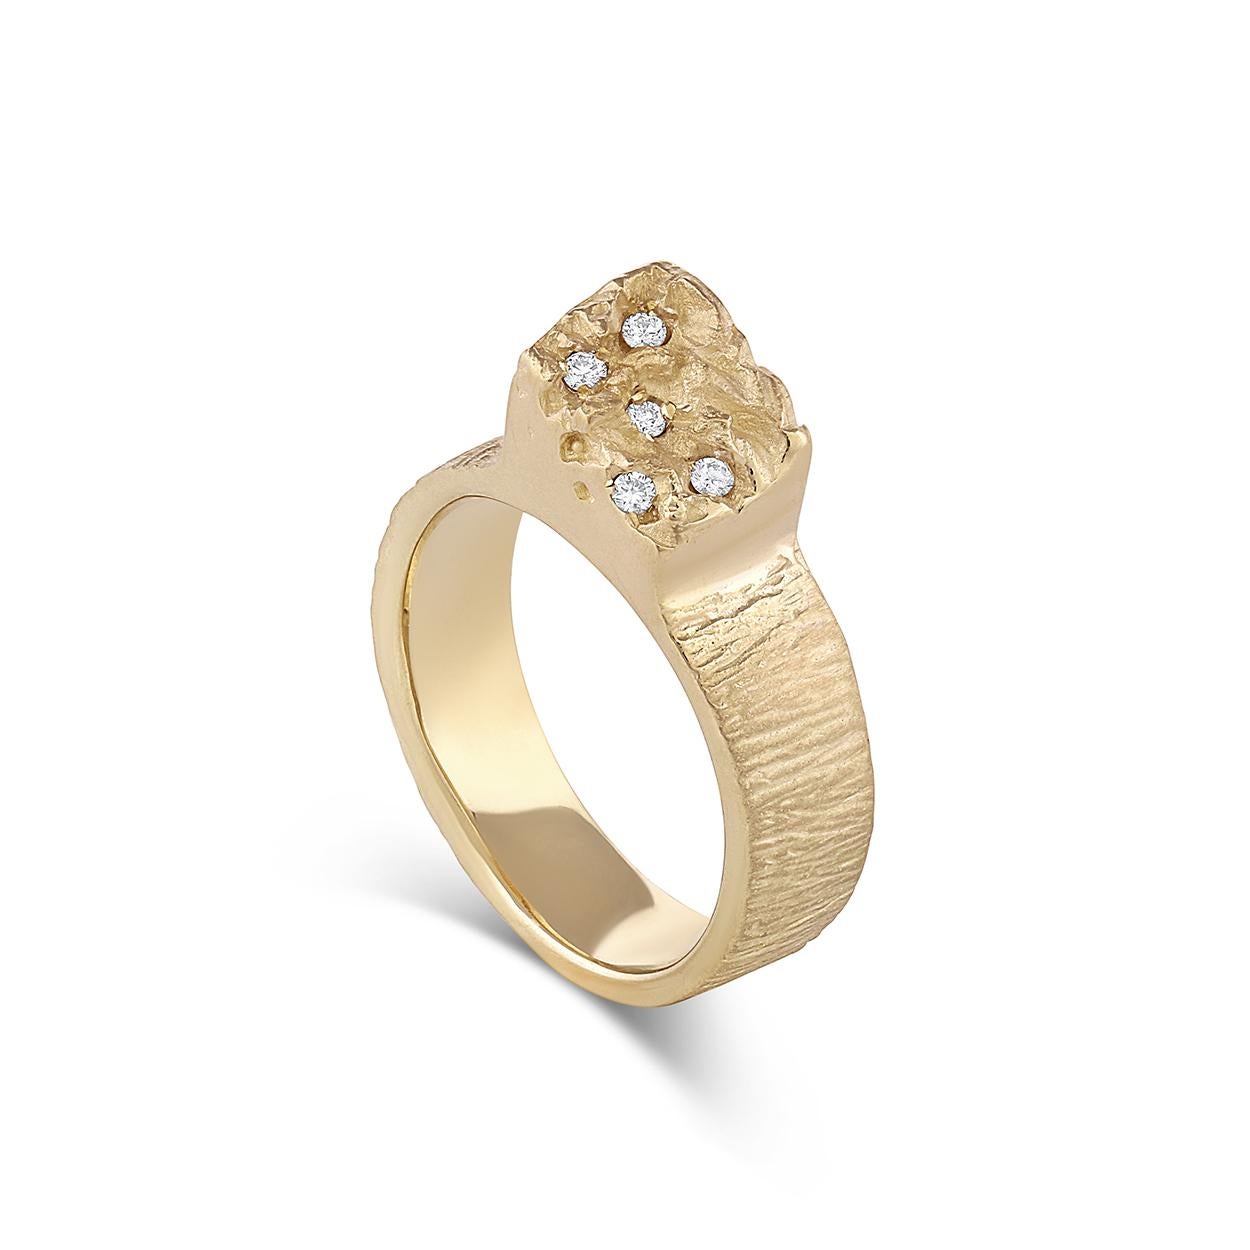 For Sale:  EMBLM Ice Cap Ring – 14K Gold, White Diamonds, Organic, Hand Carved 5